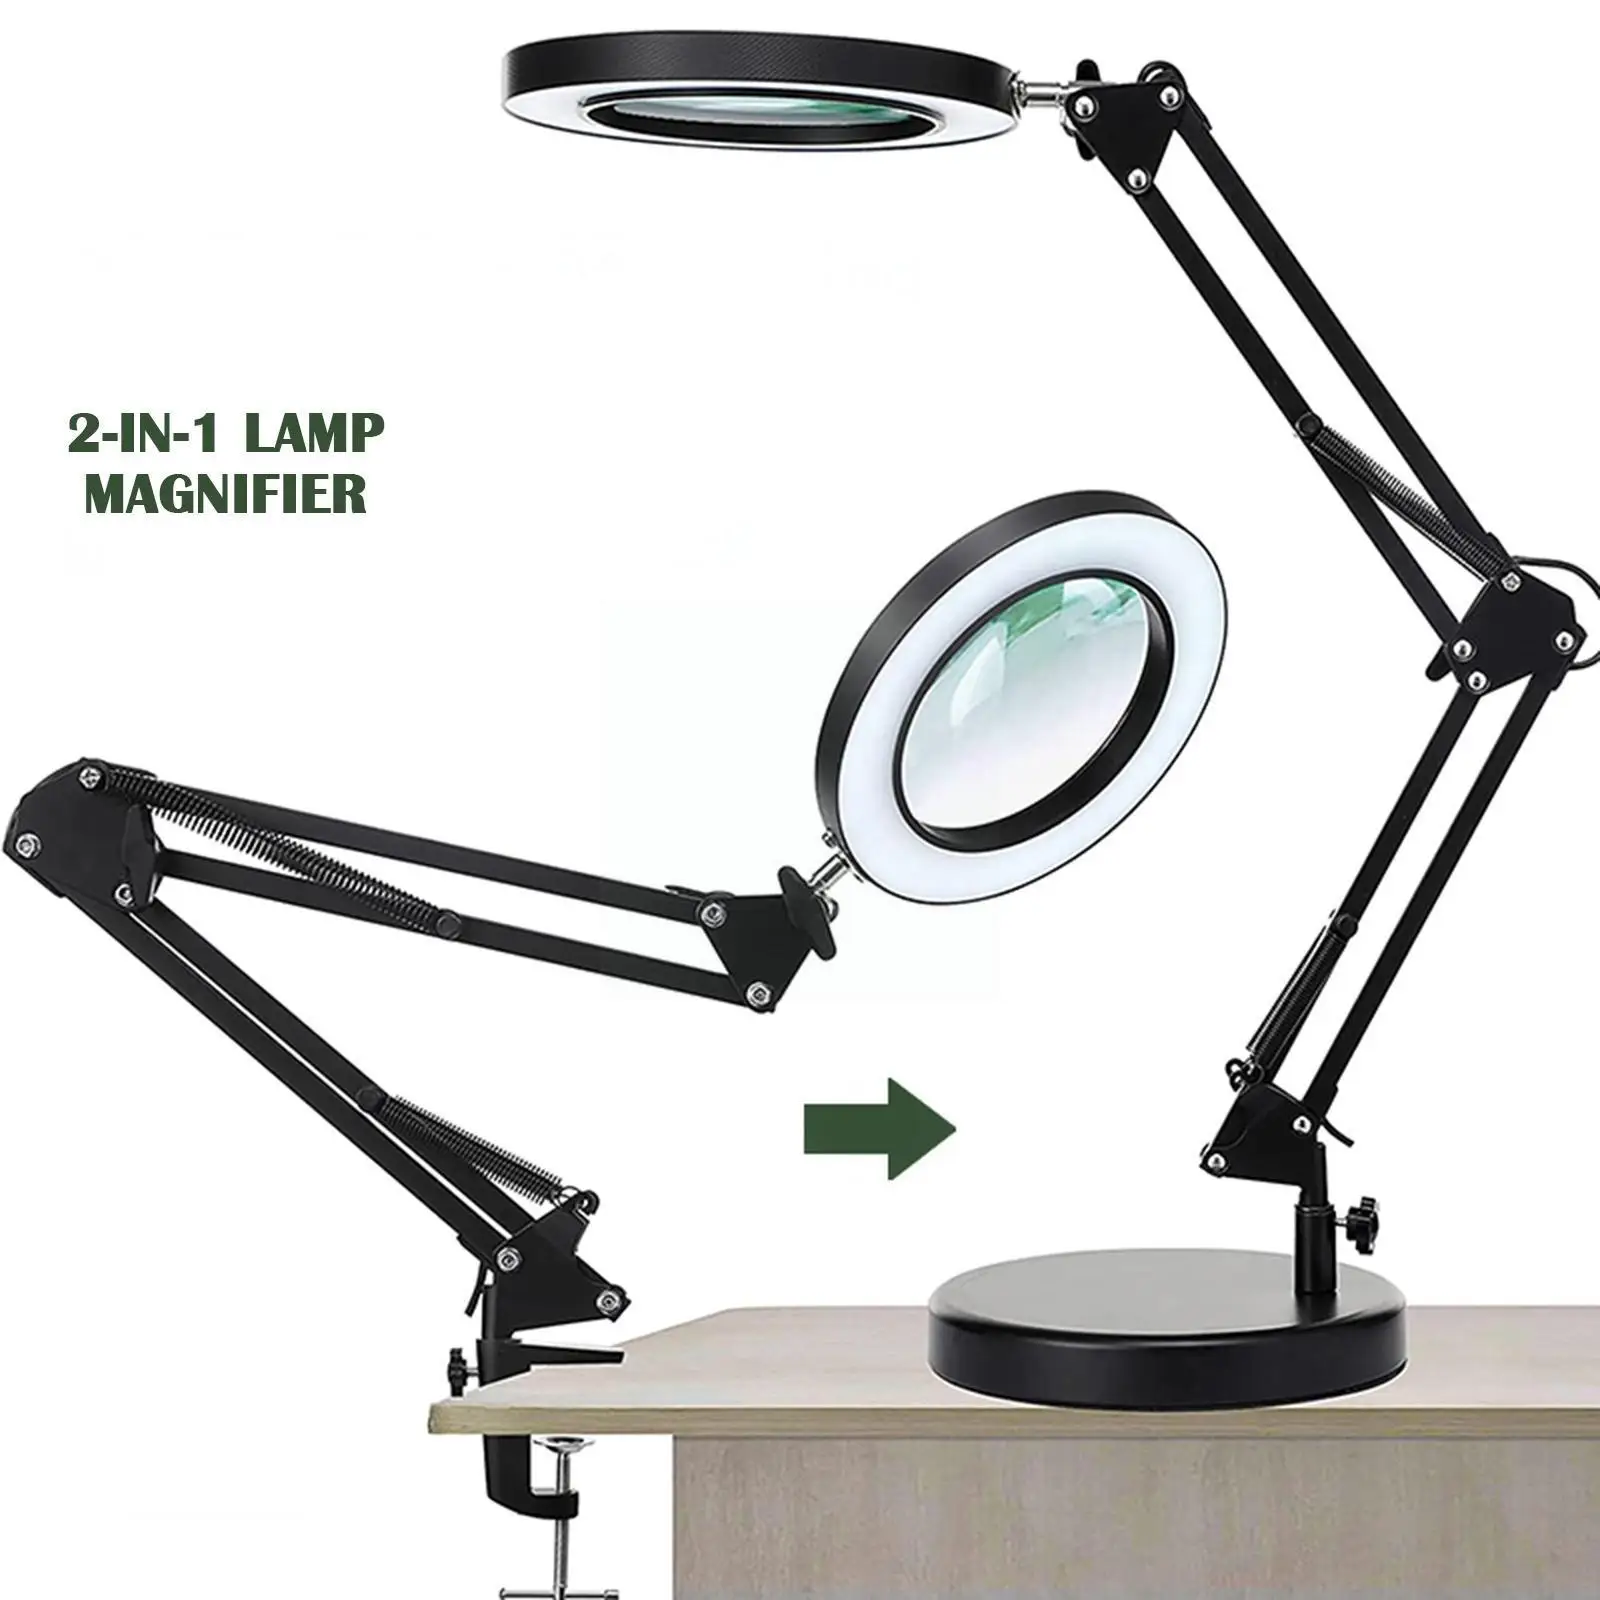 

Metal Magnifier Table Lamp 2.25x Magnifier Glass Flexible Led Illuminated Color 3 Desk Light Arm Swing Dimmable Clamp-on T5p0